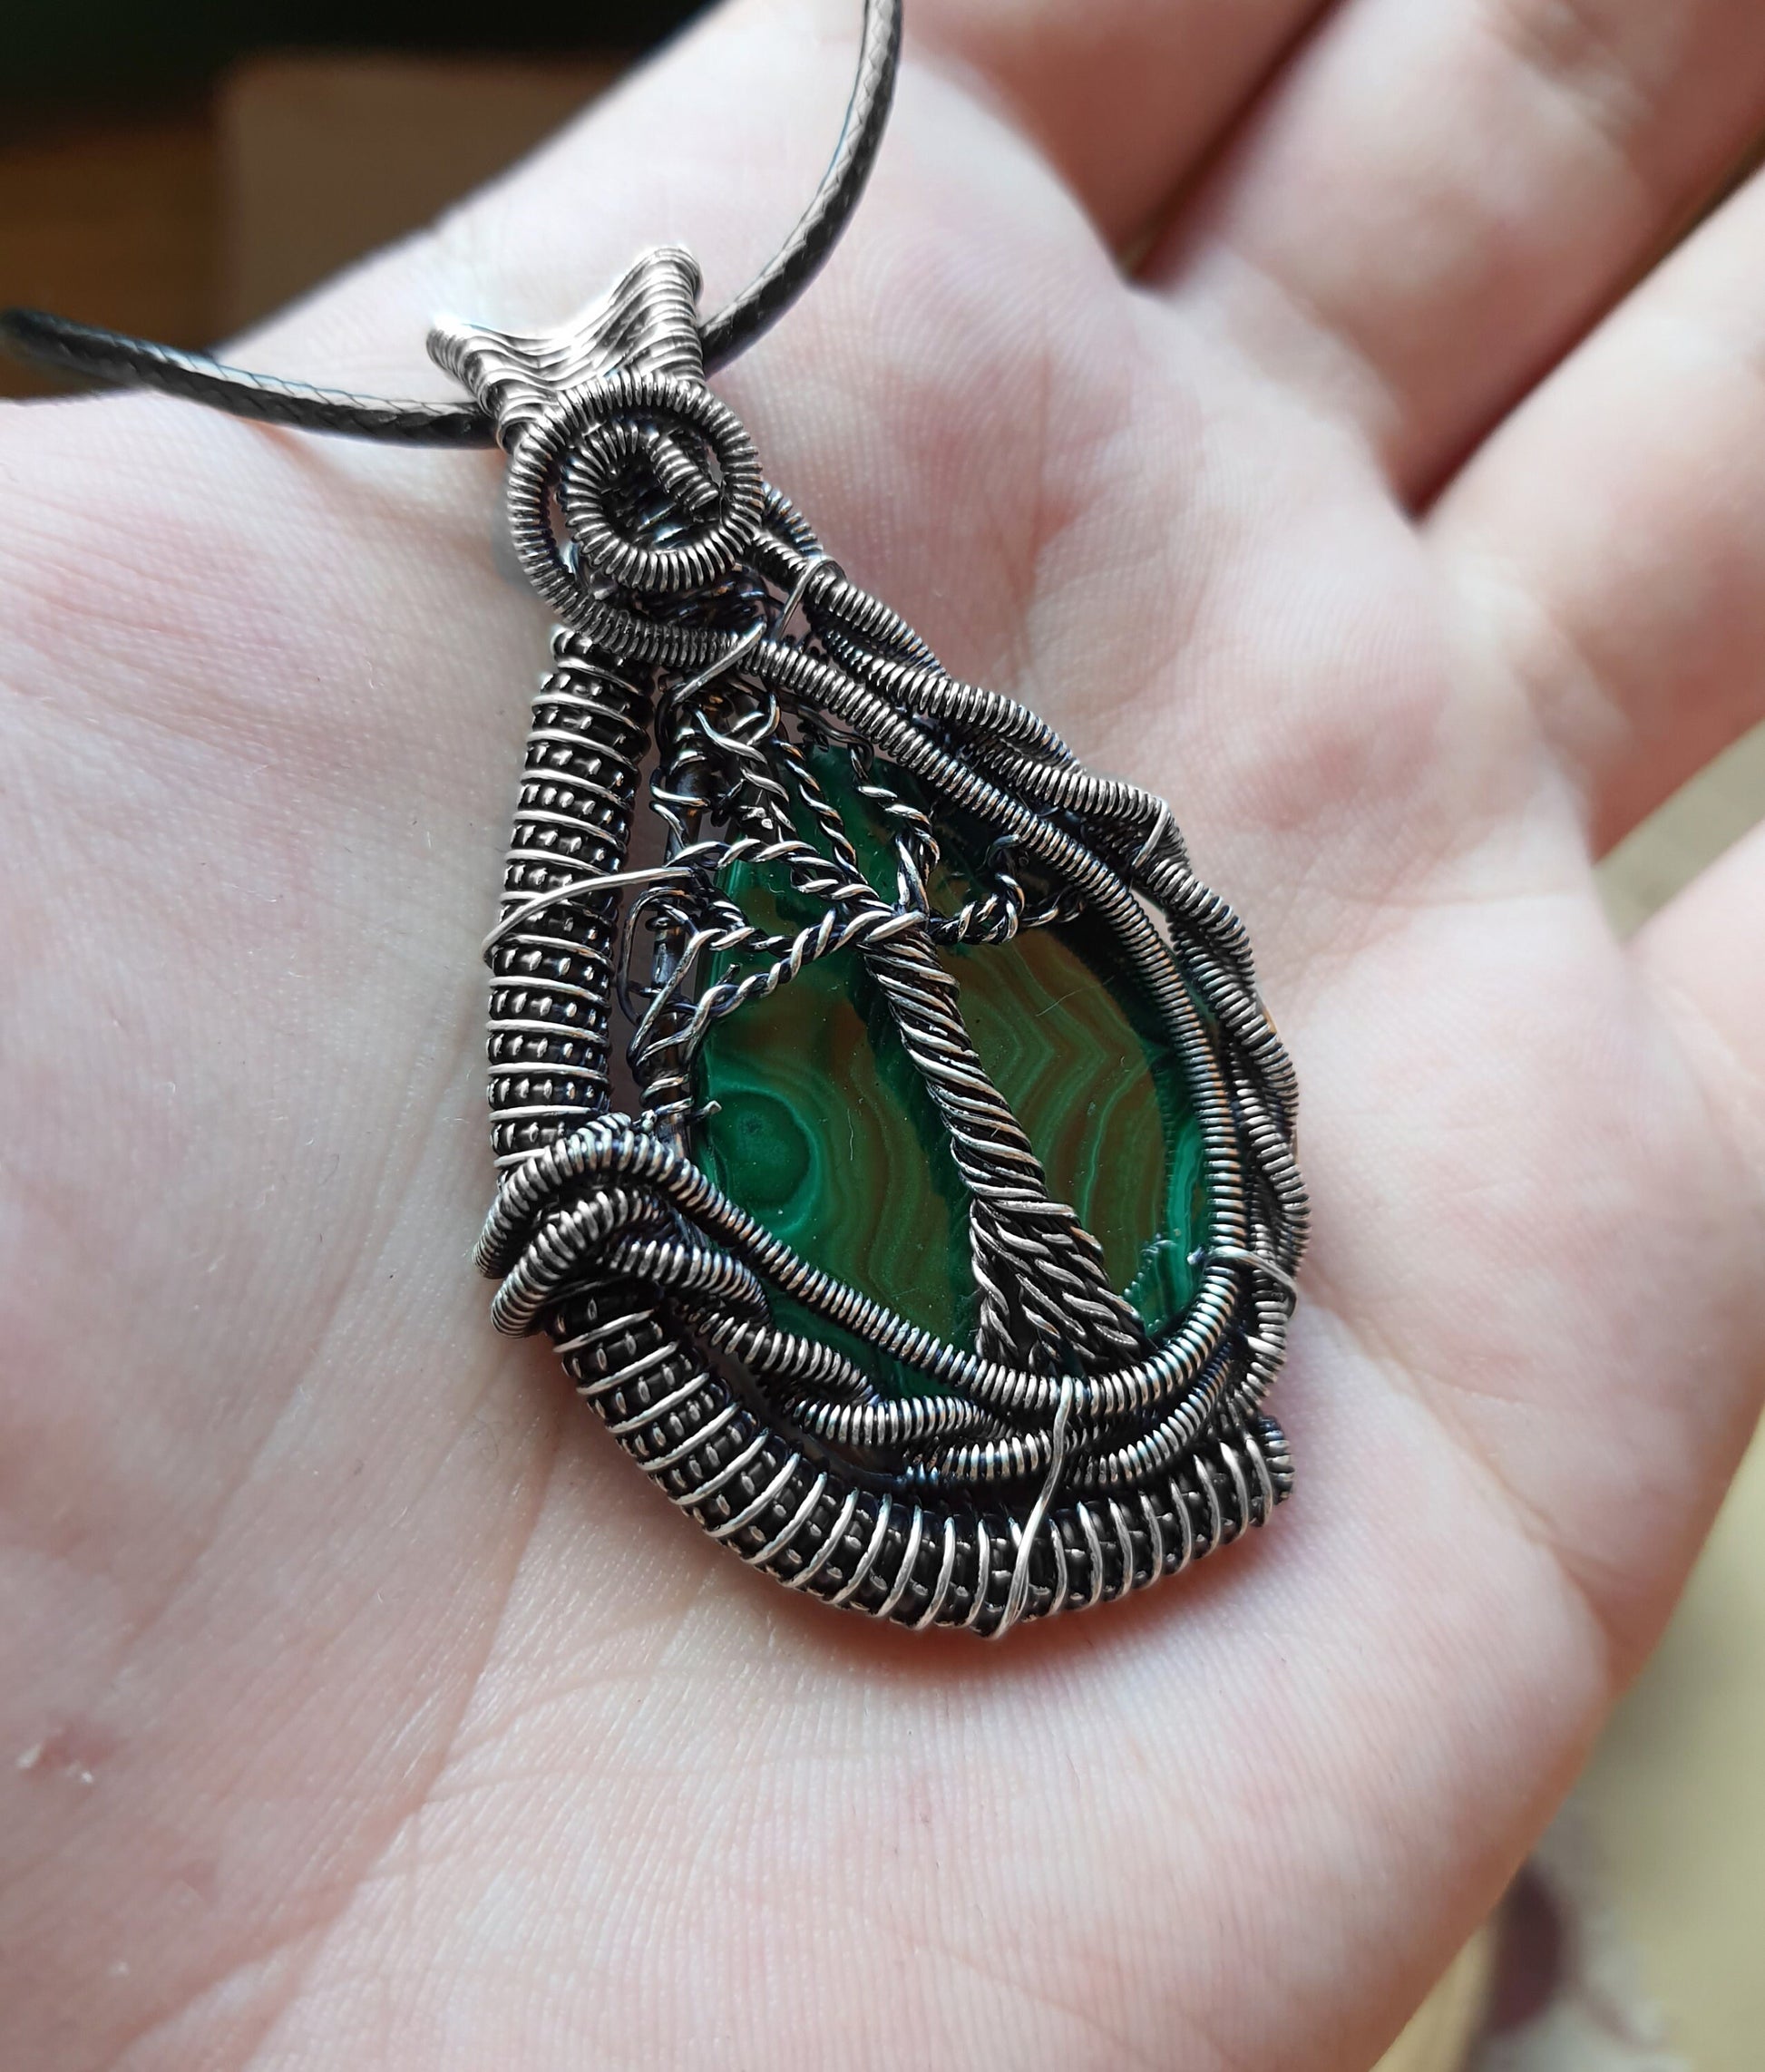 Malachite Wire Wrapped Pendant In Sterling Silver Oval Necklace Boho Gift Blue Pendant GypsyJewelry Unique Gift For Her